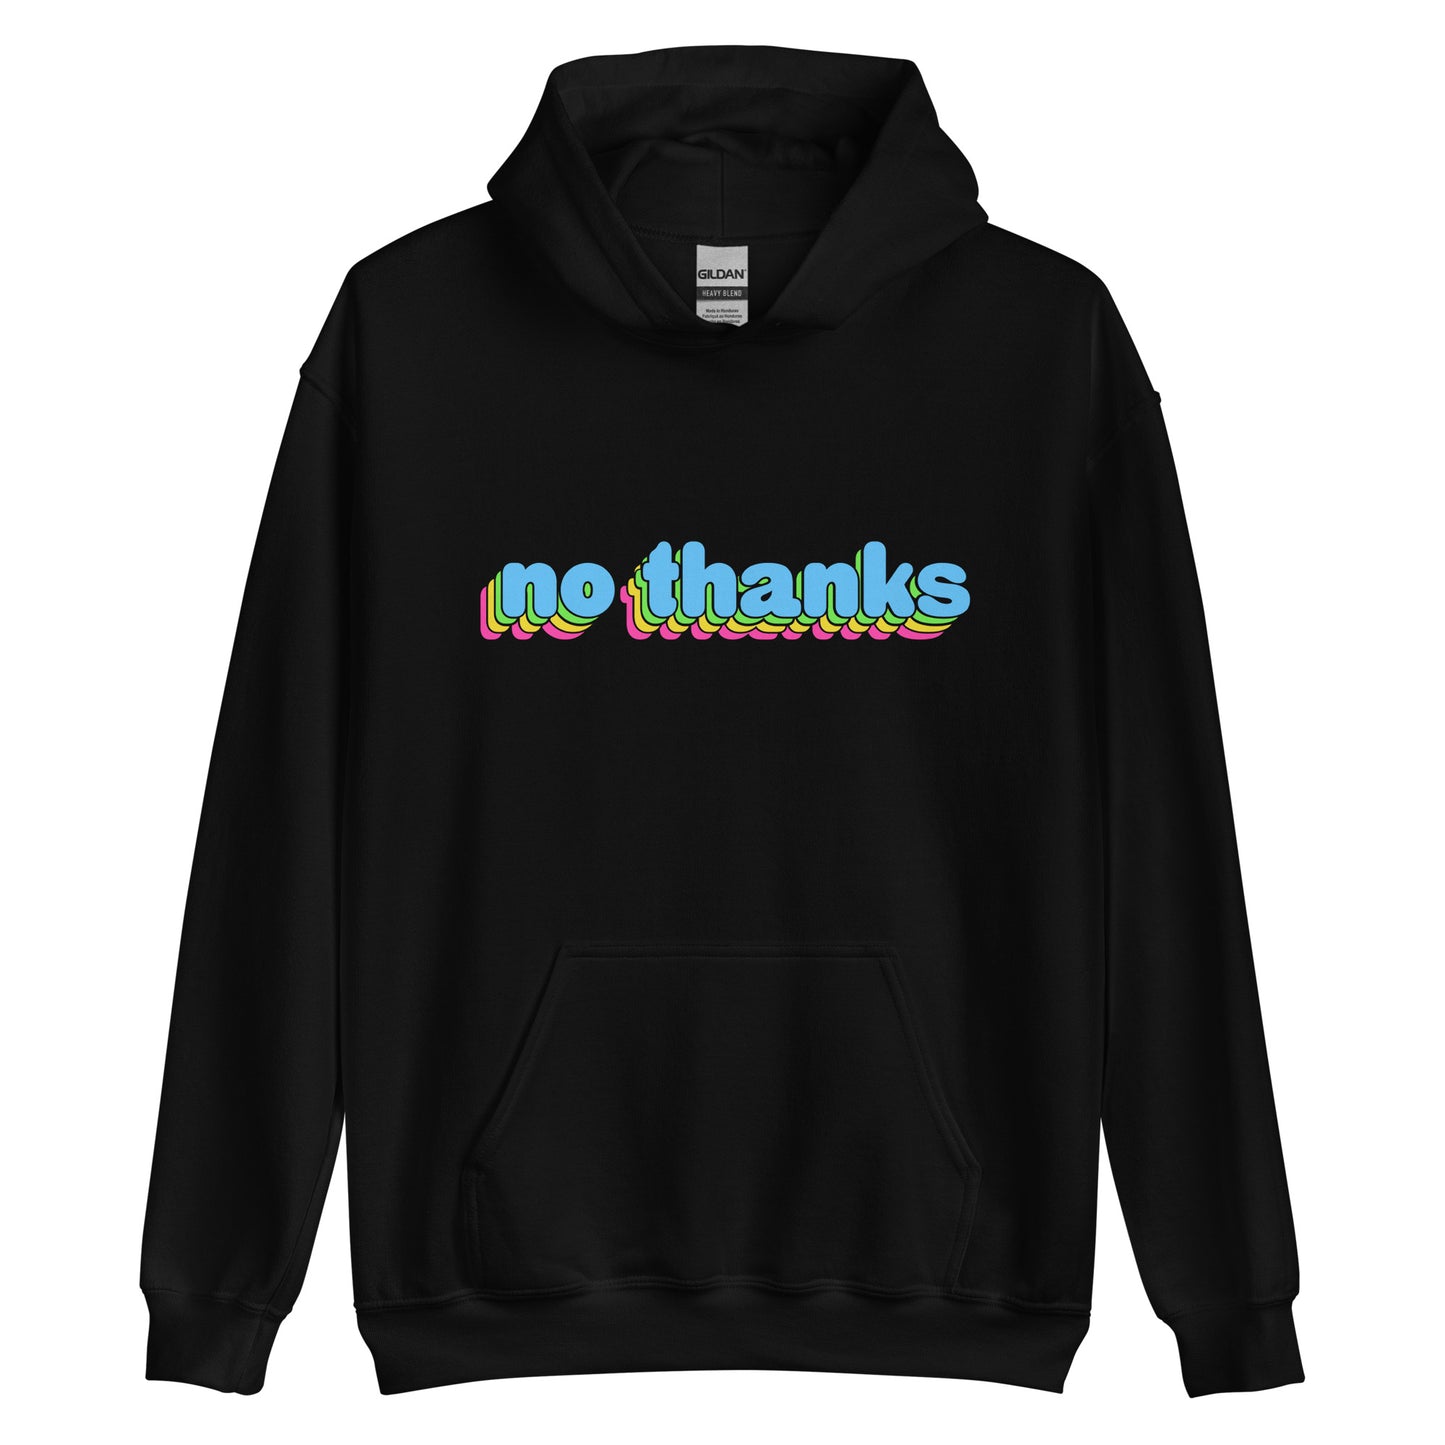 A black hooded sweatshirt featuring large, colorful bubble text that reads "no thanks".